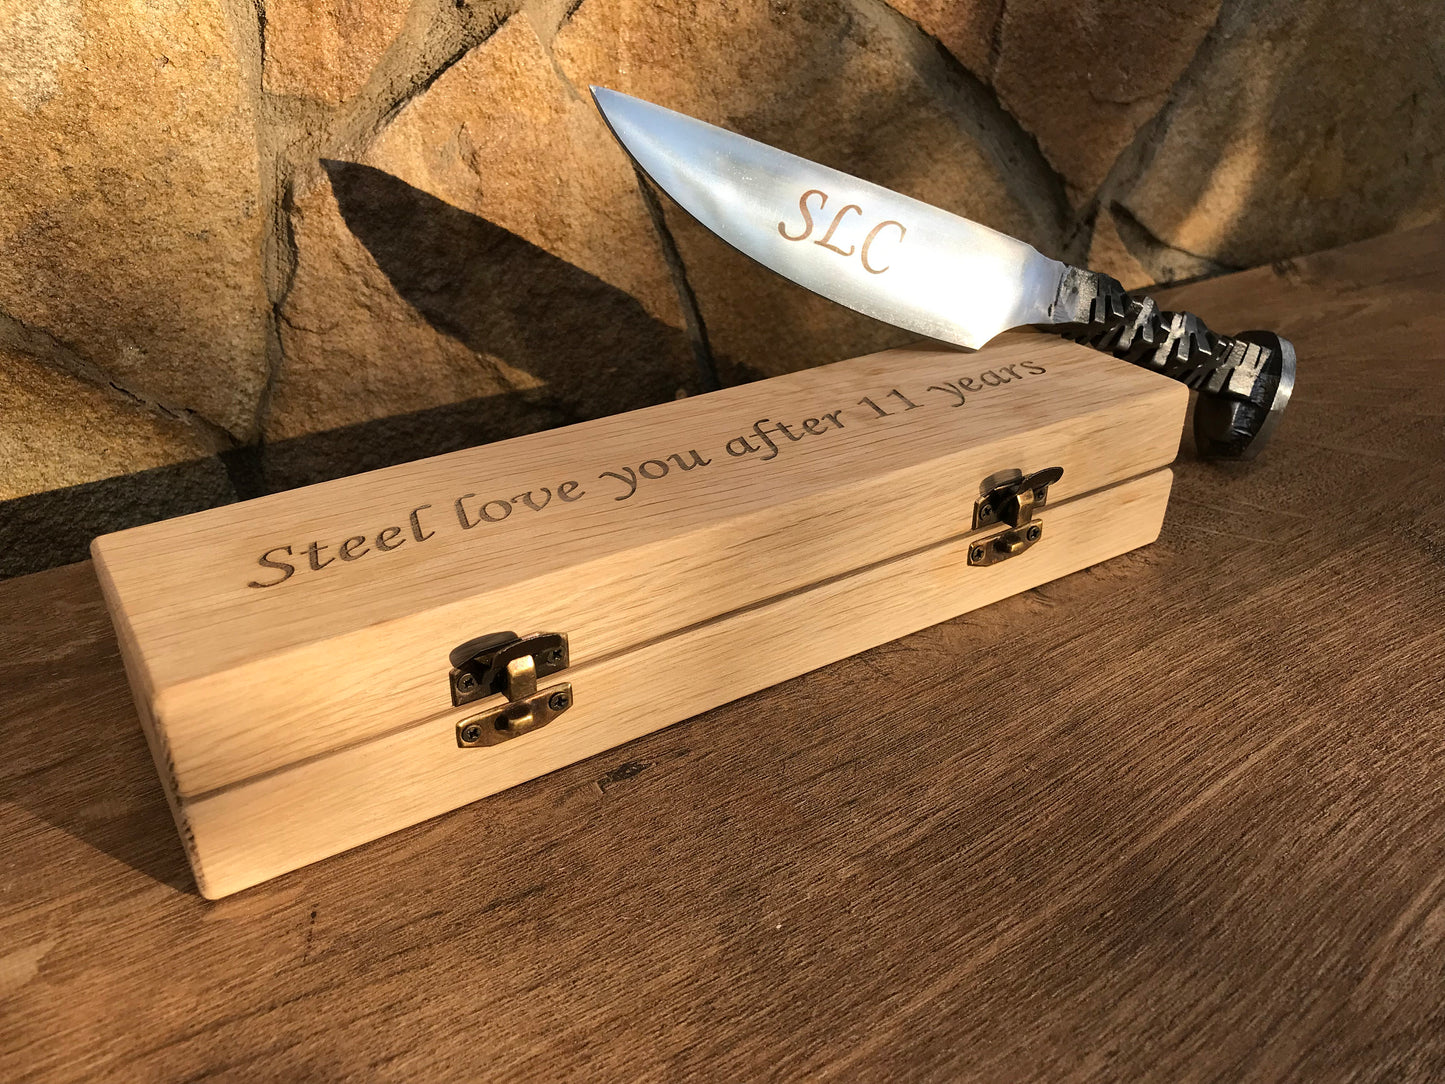 11th anniversary, steel gifts for him, engraved steel gift, railroad spike knife, 11th anniversary gift for him, steel jewelry, steel gifts